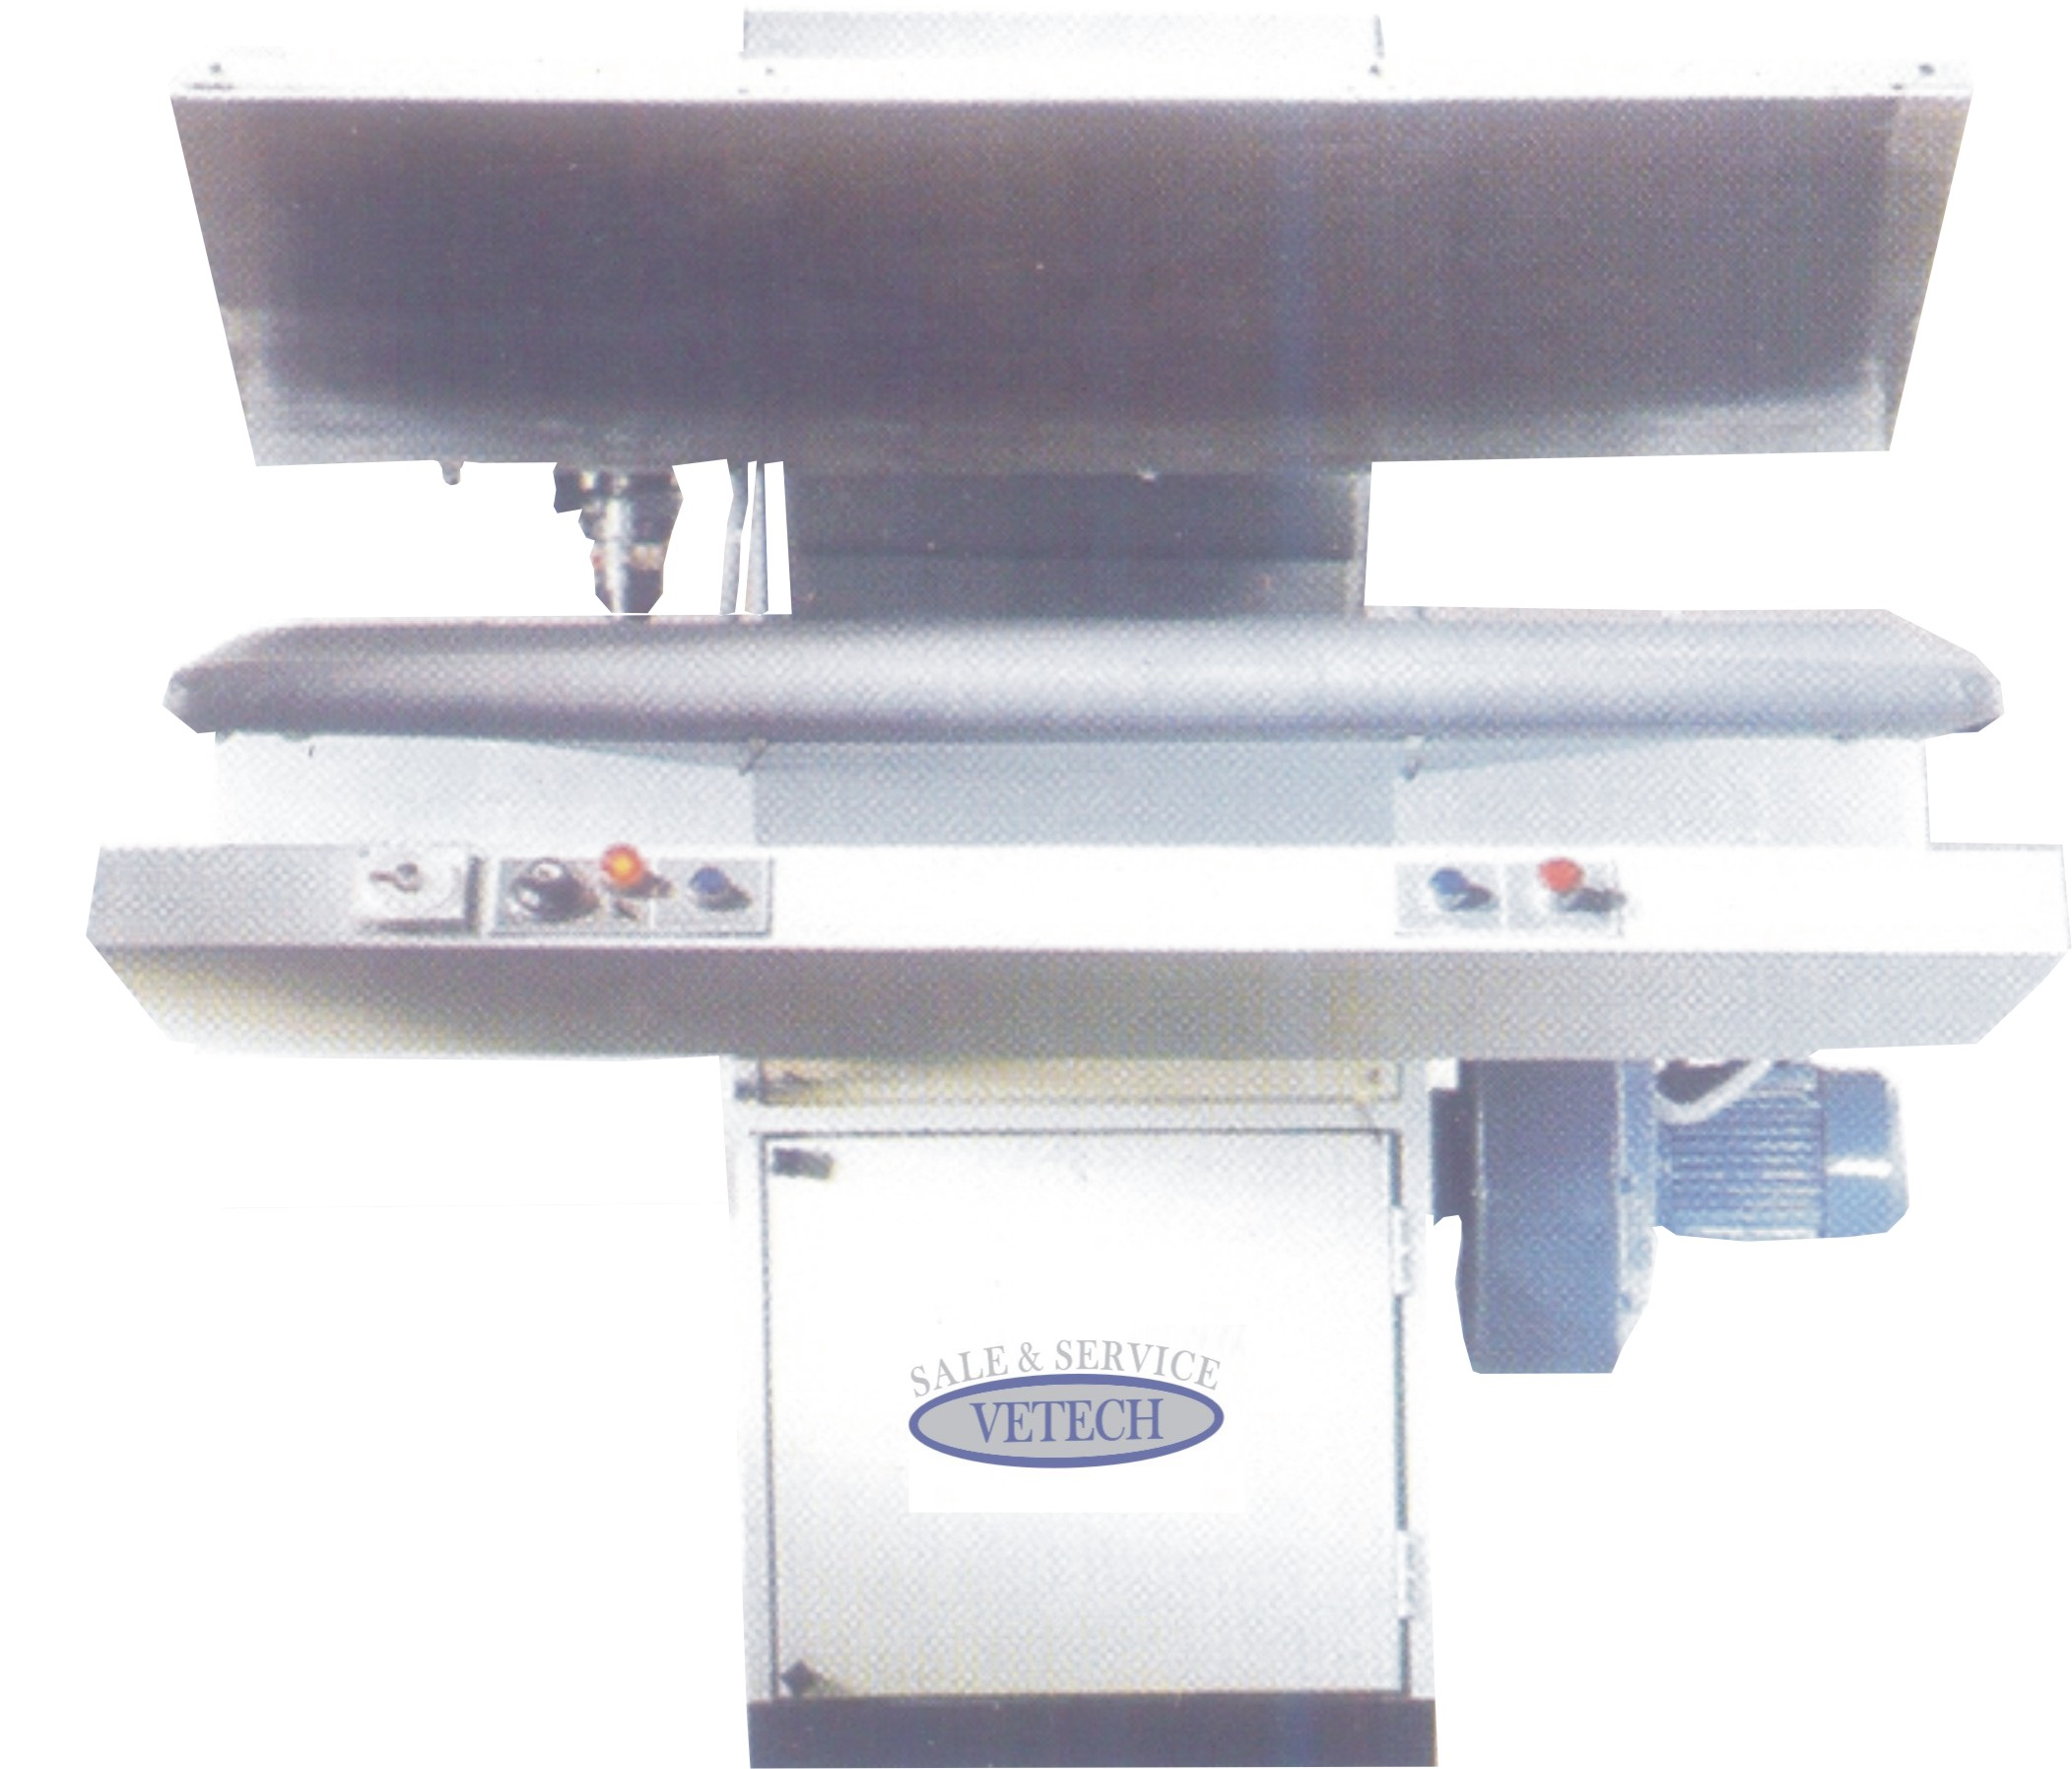 INDUSTRIAL FLAT BED / HOT BED PRESS